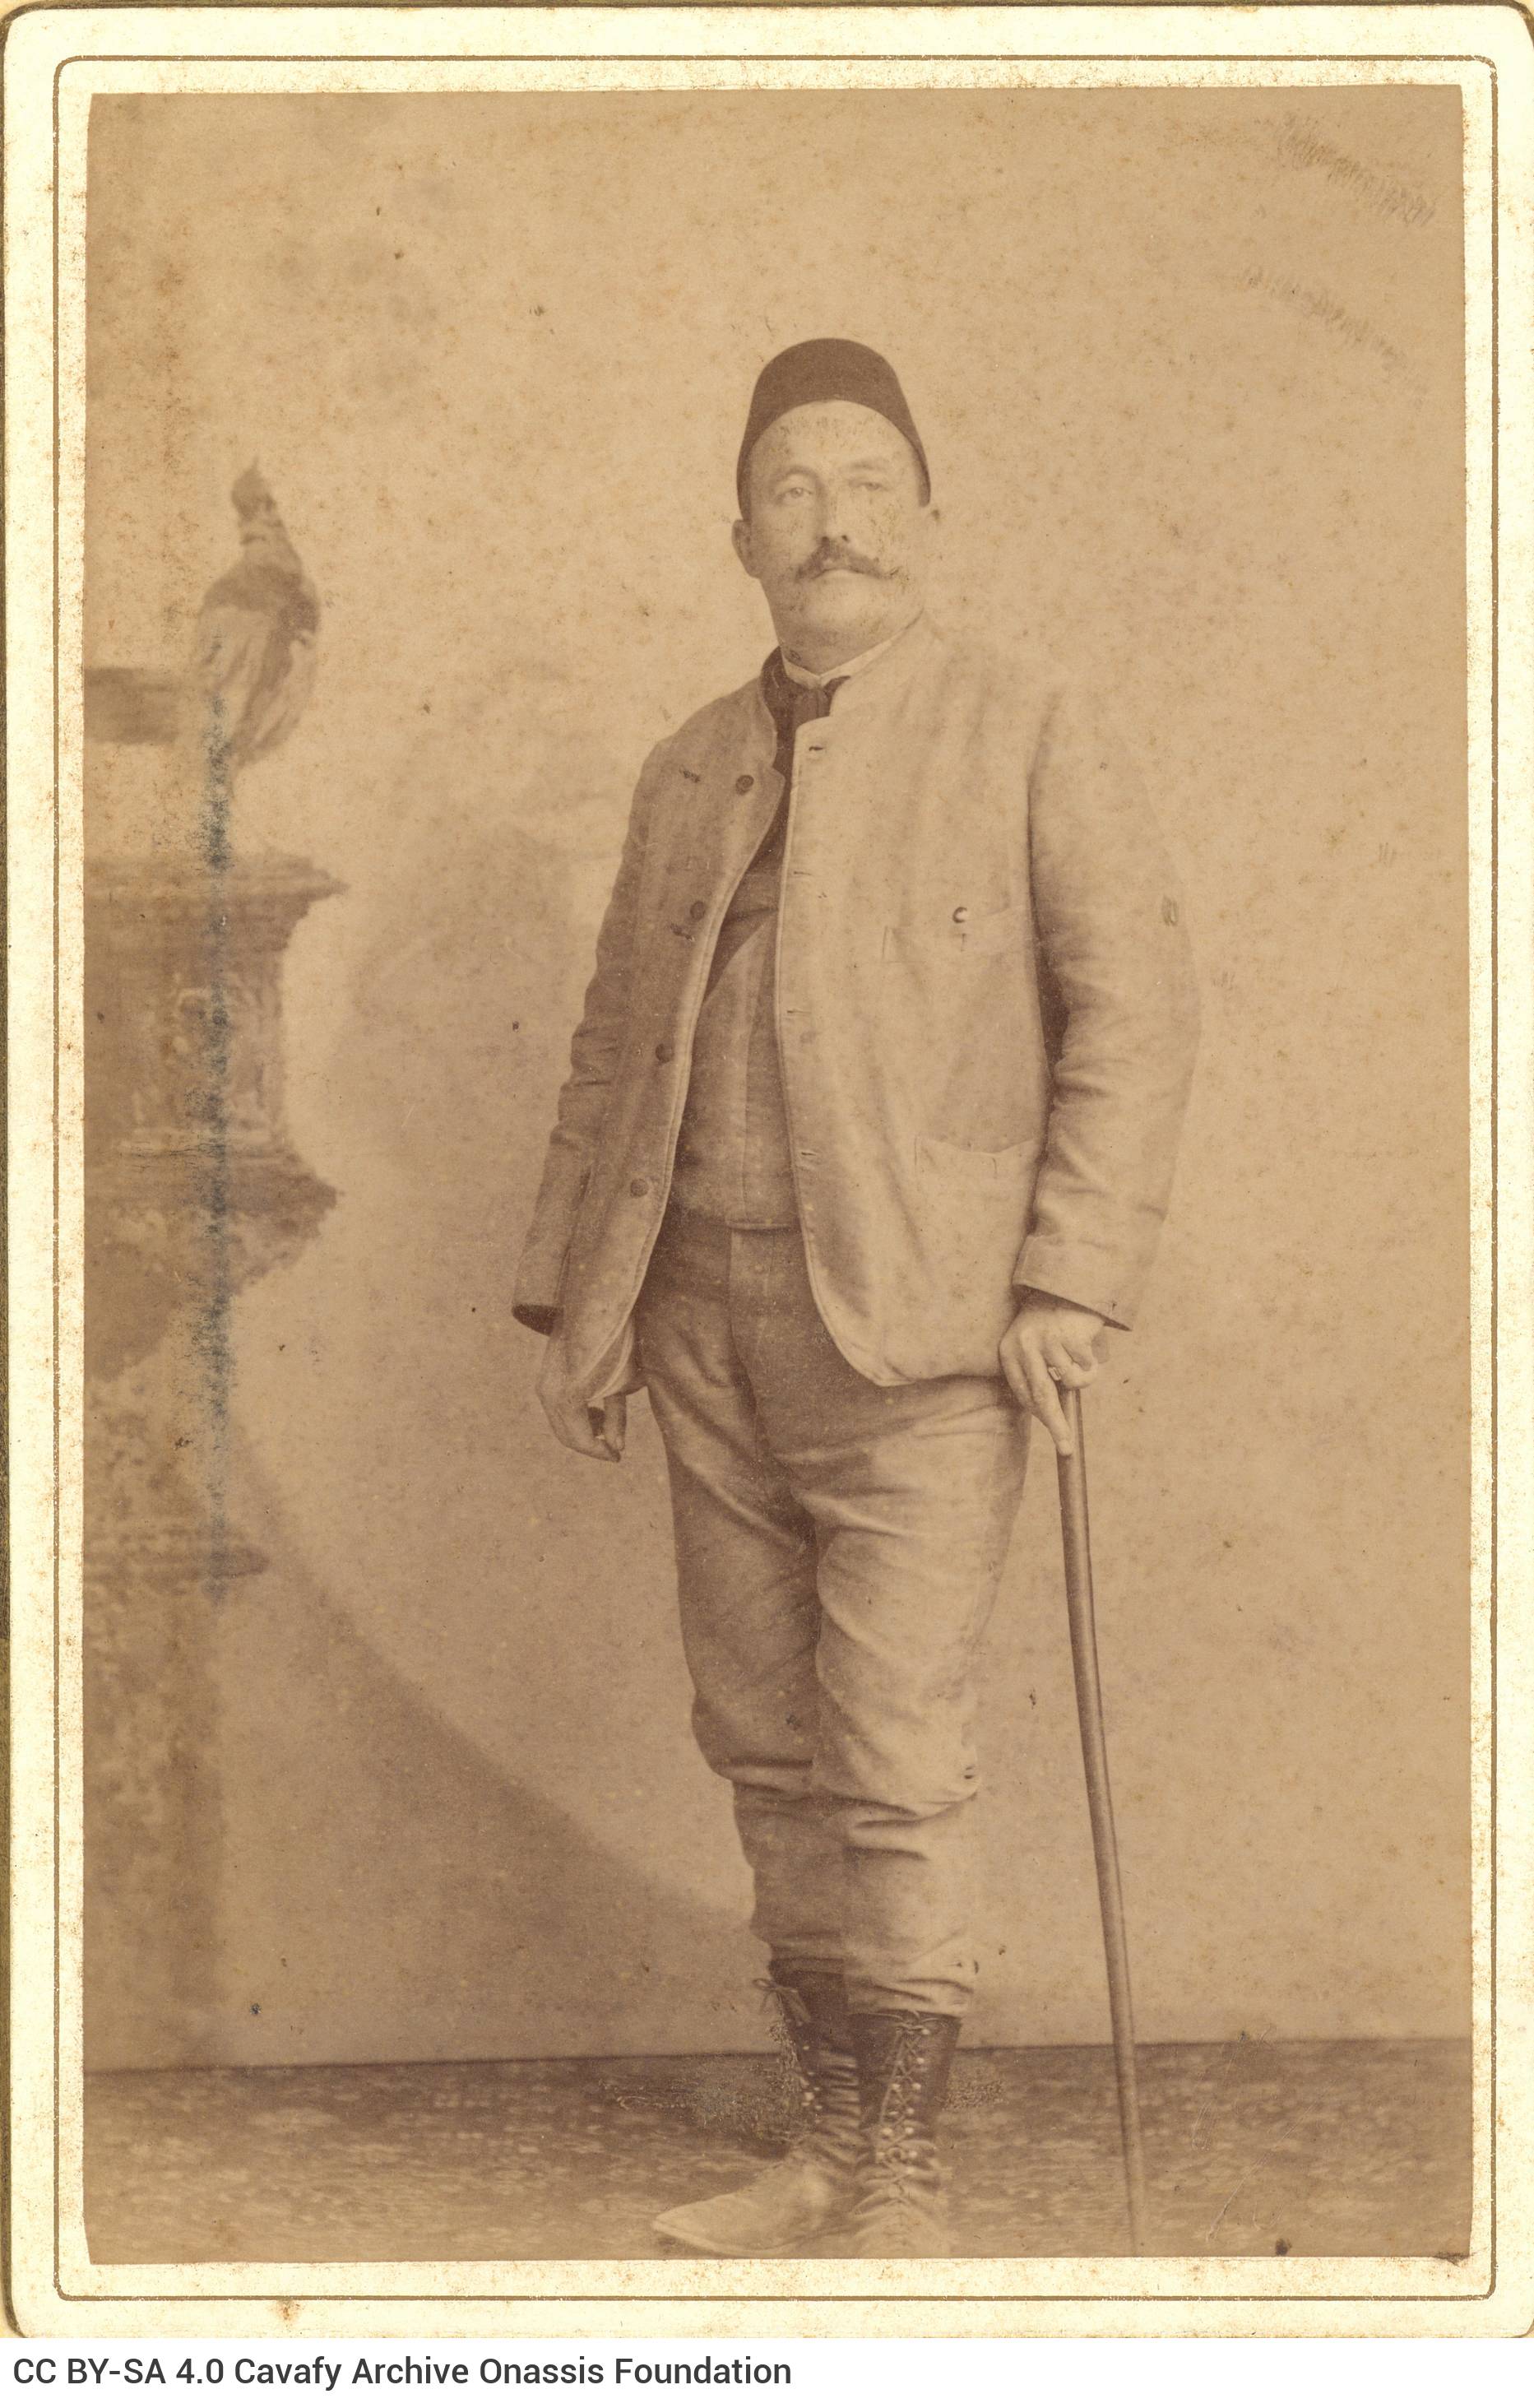 Undated photographic portrait of a man in a fez and with a cane in his left hand.